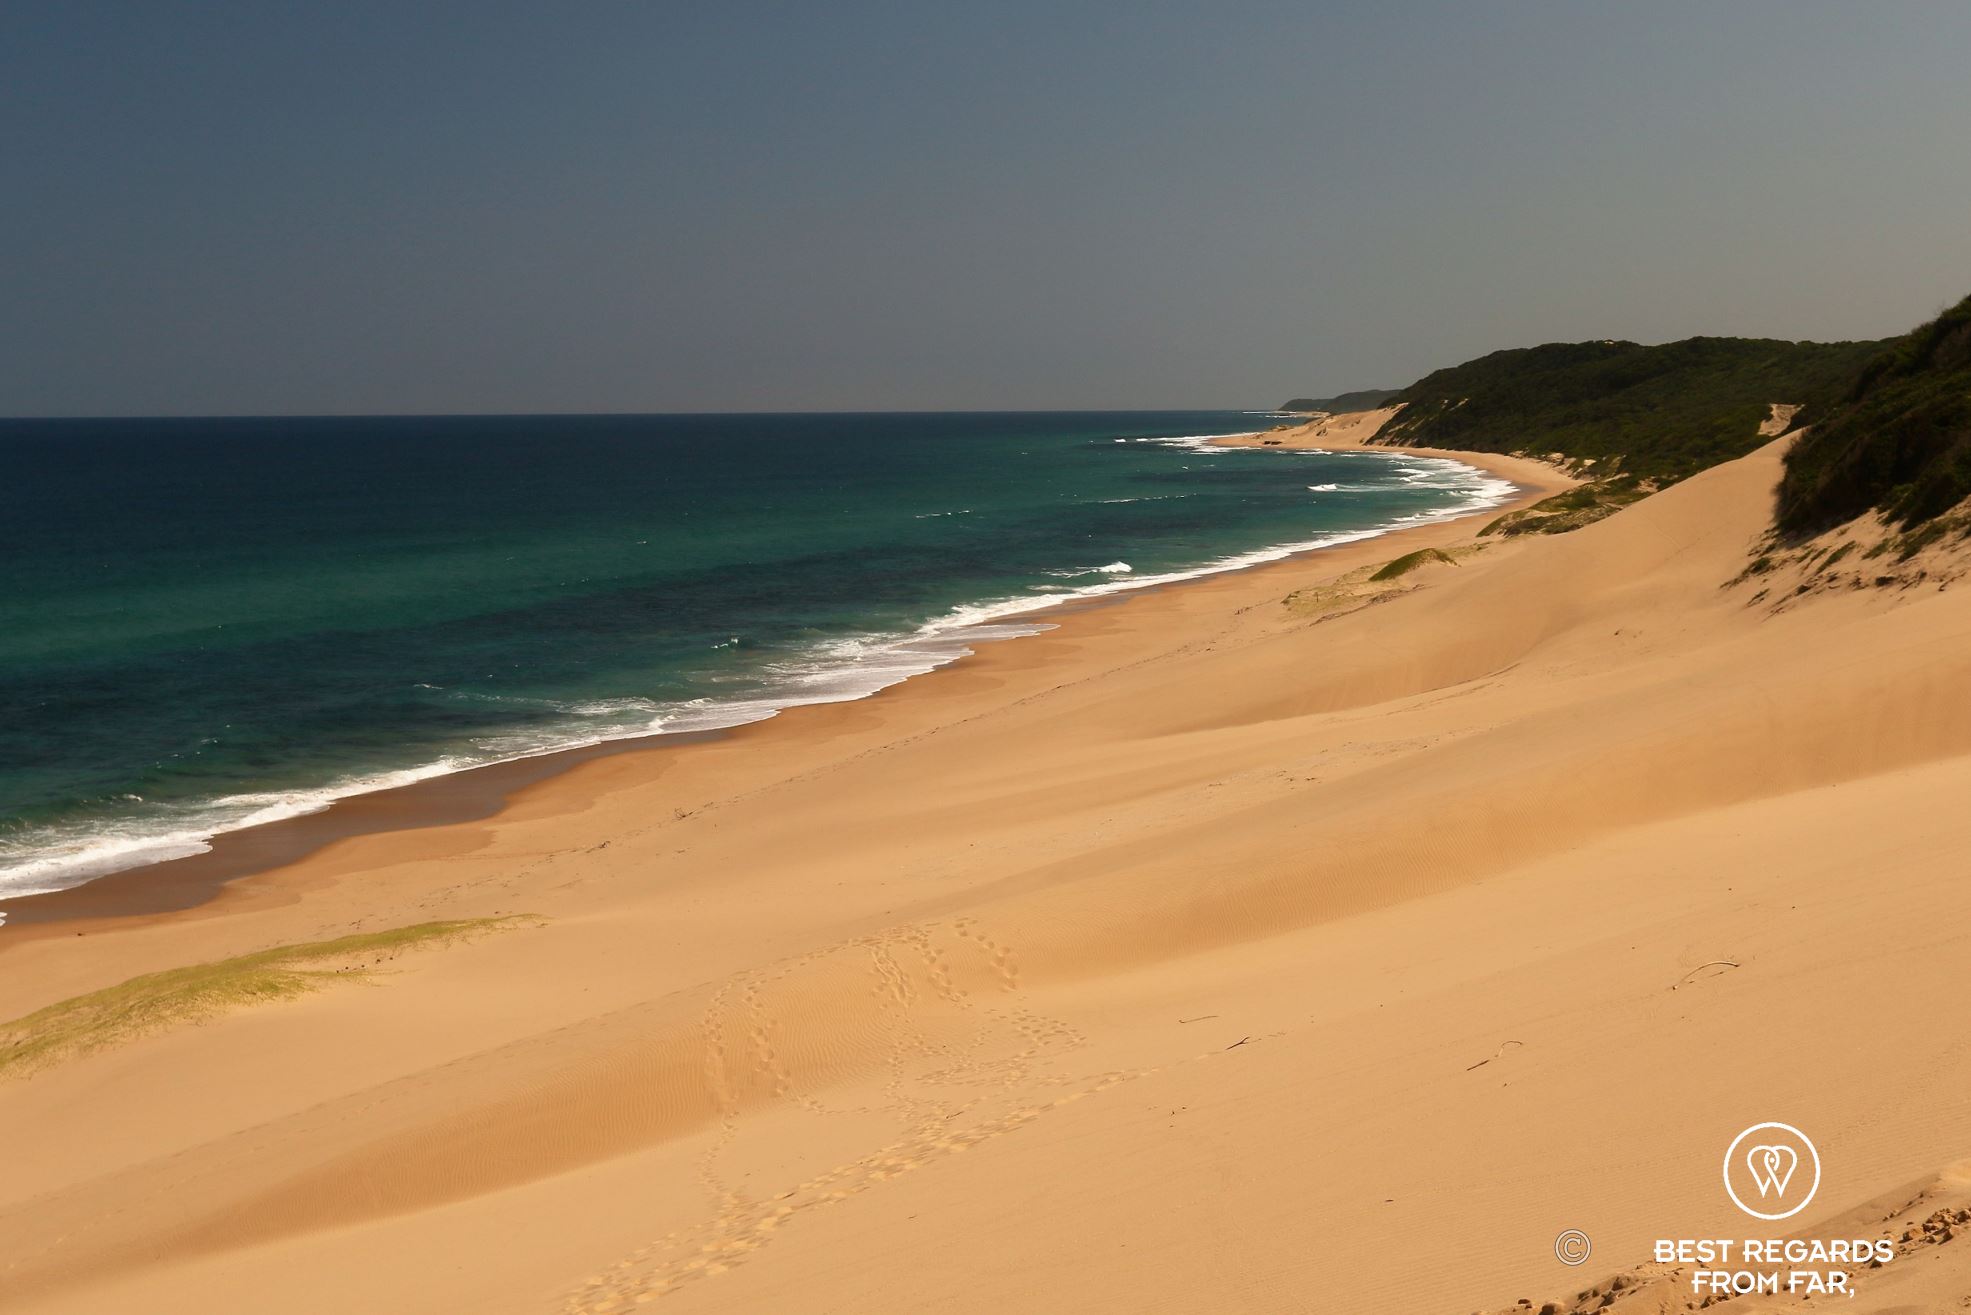 Unspoilt beaches and turtle nesting area, Kosi Bay, South Africa